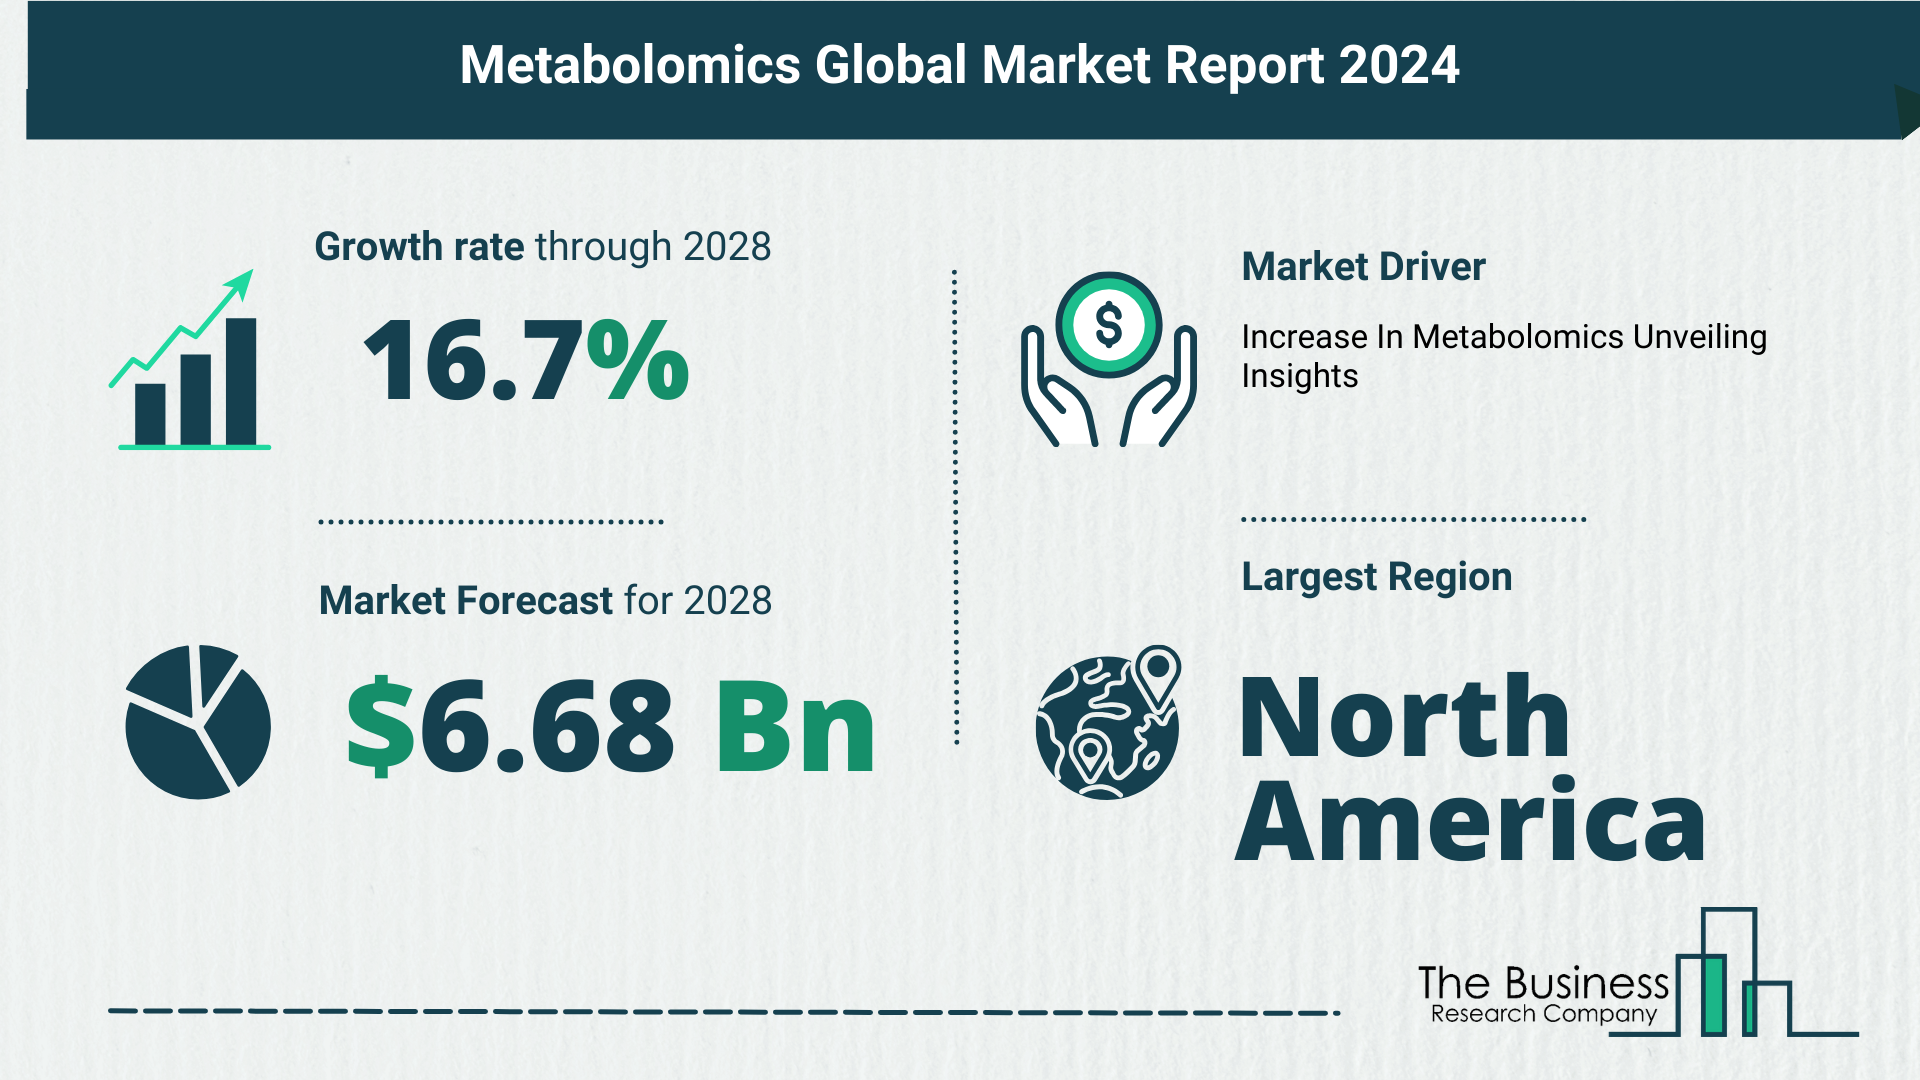 Top 5 Insights From The Metabolomics Market Report 2024